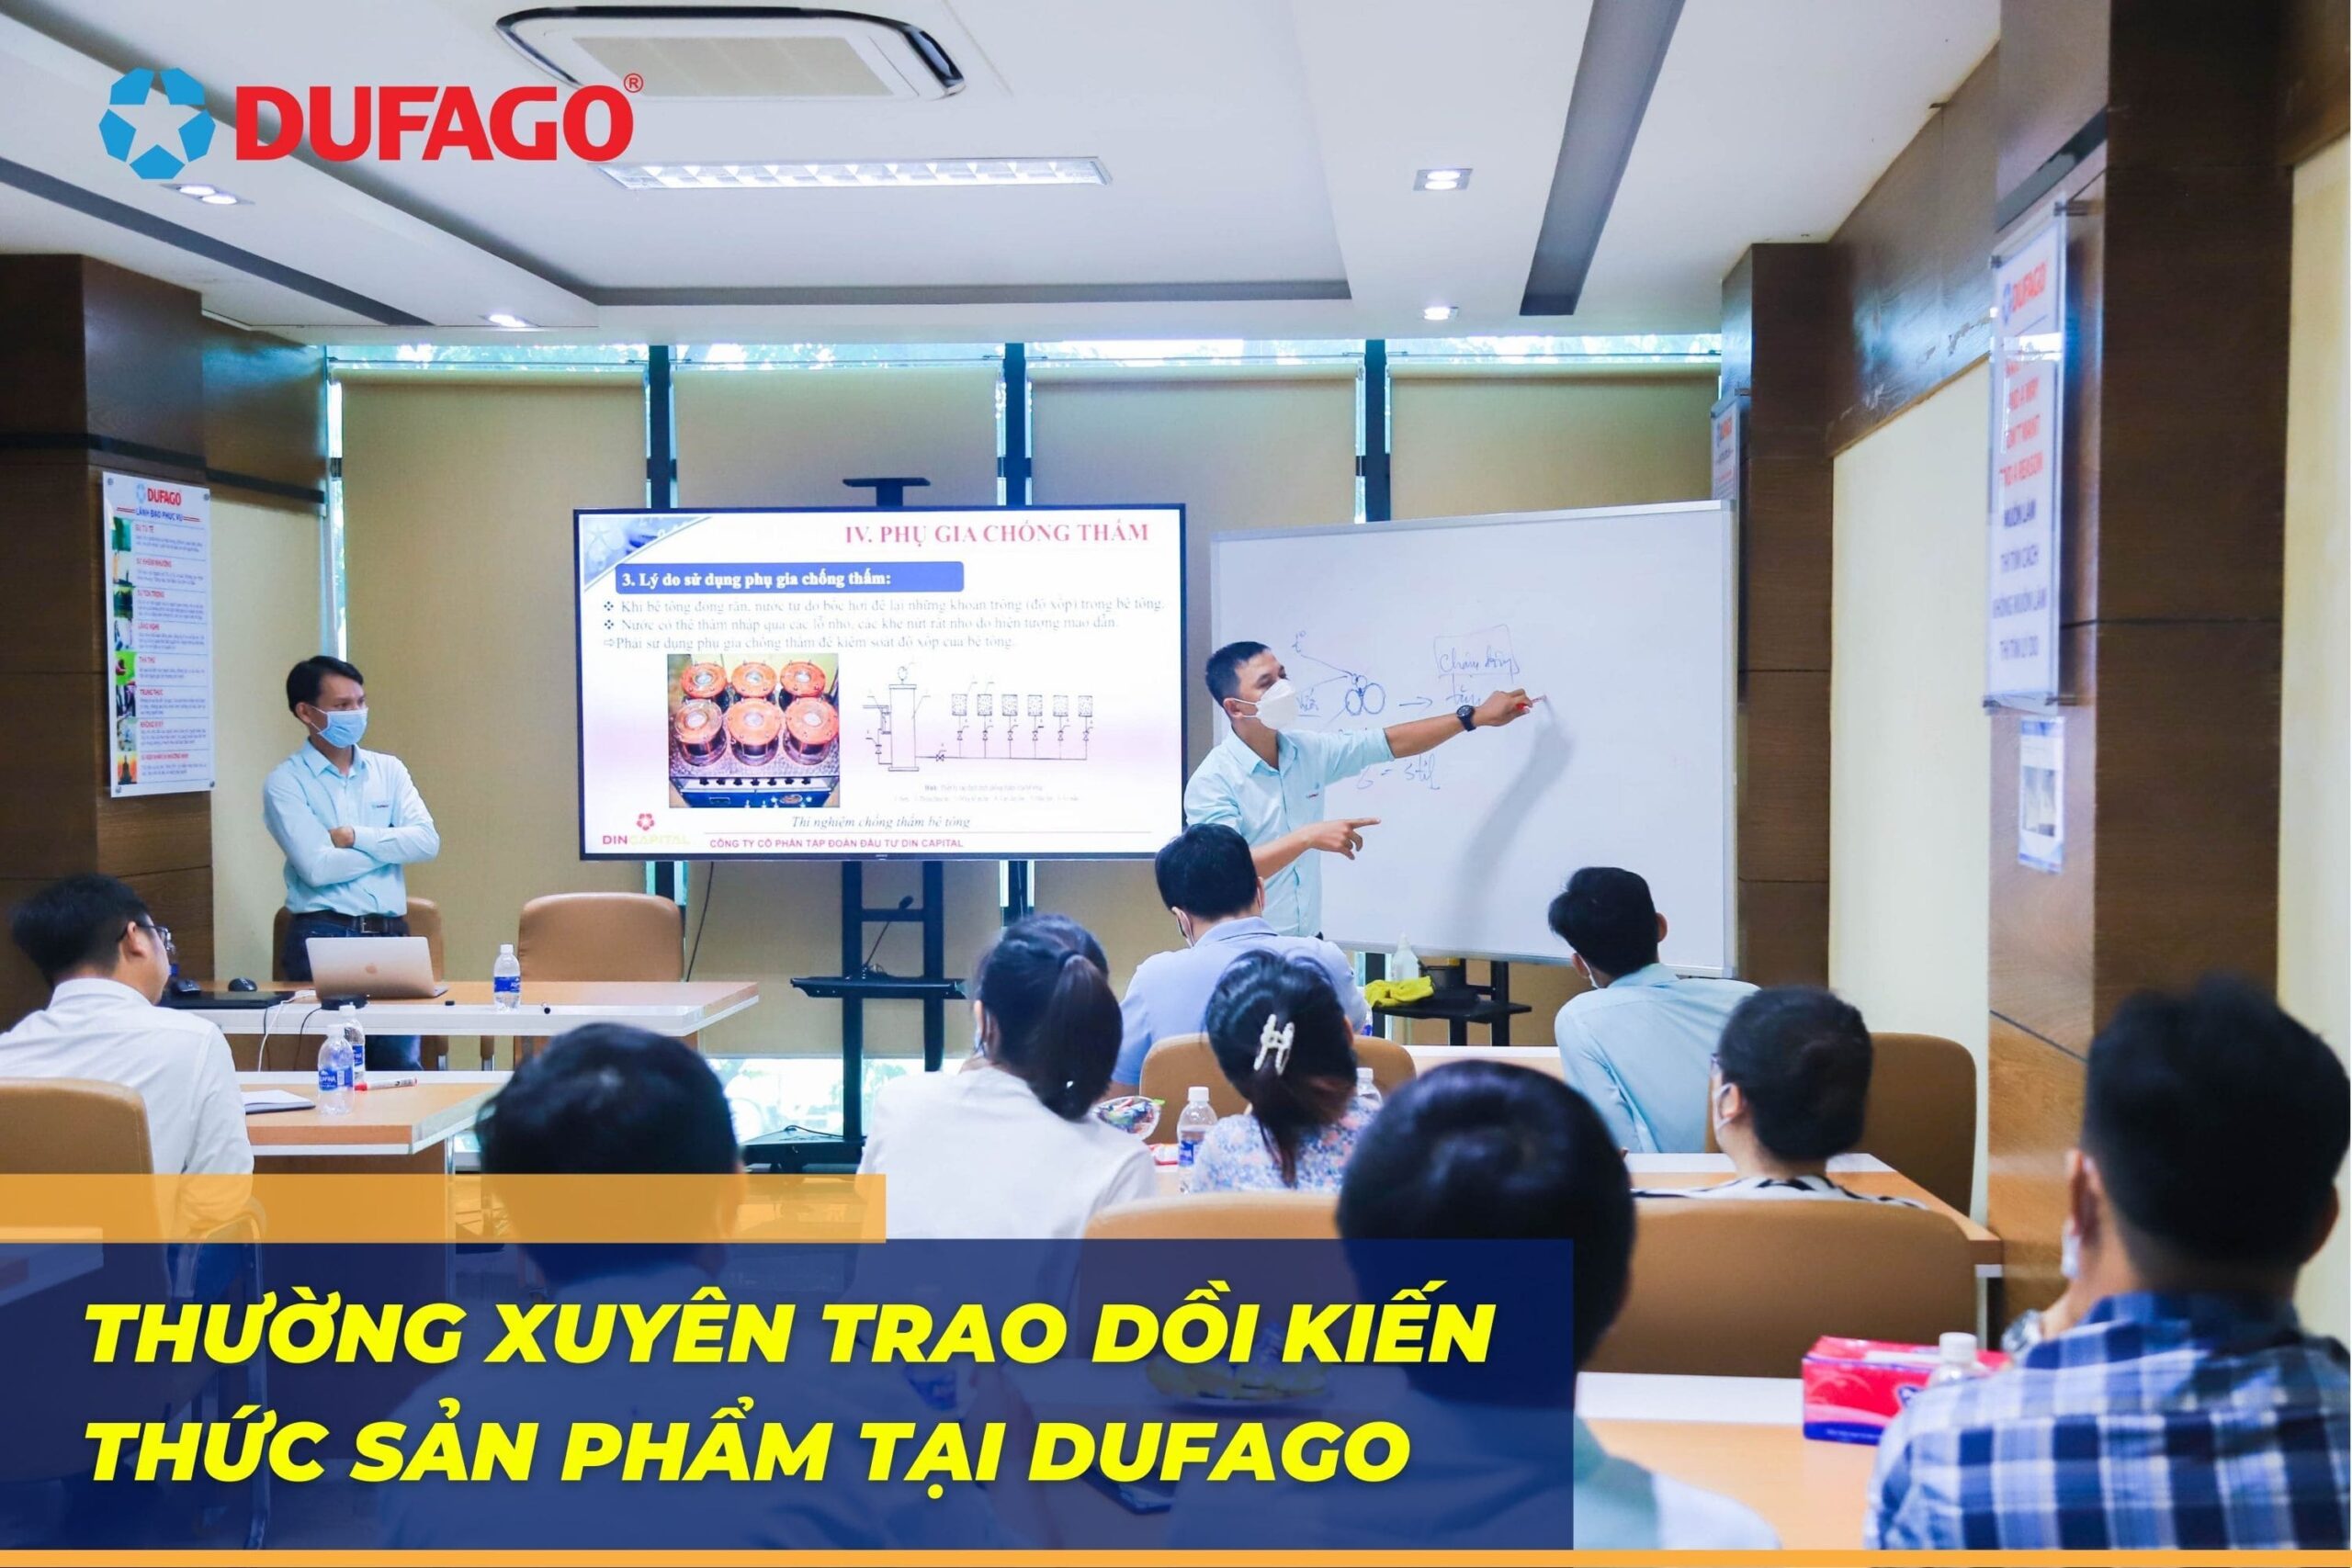 Product training session at Dufago